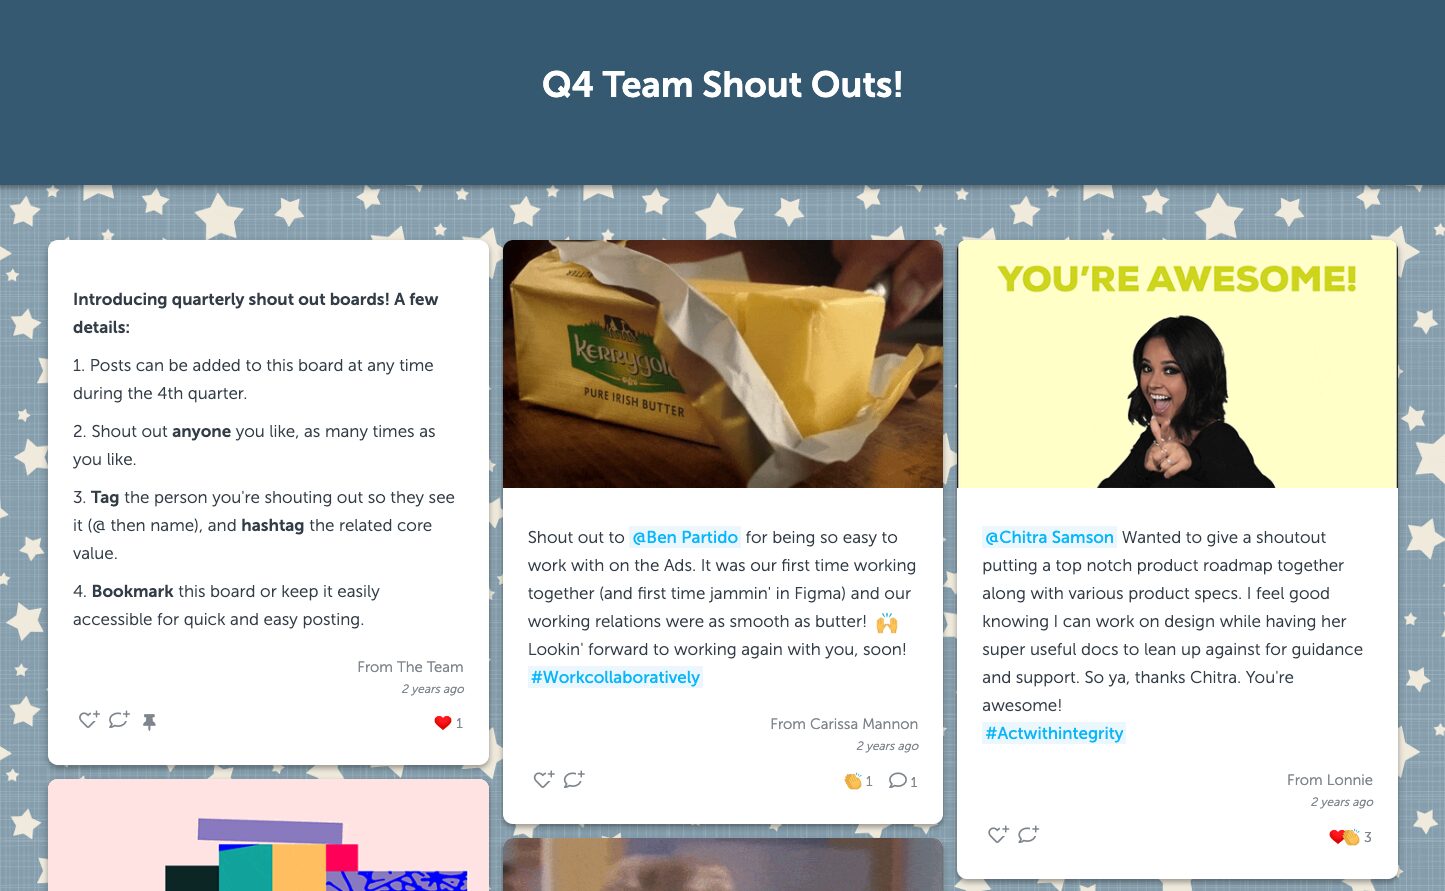 Q4 Team shout out board full of posts